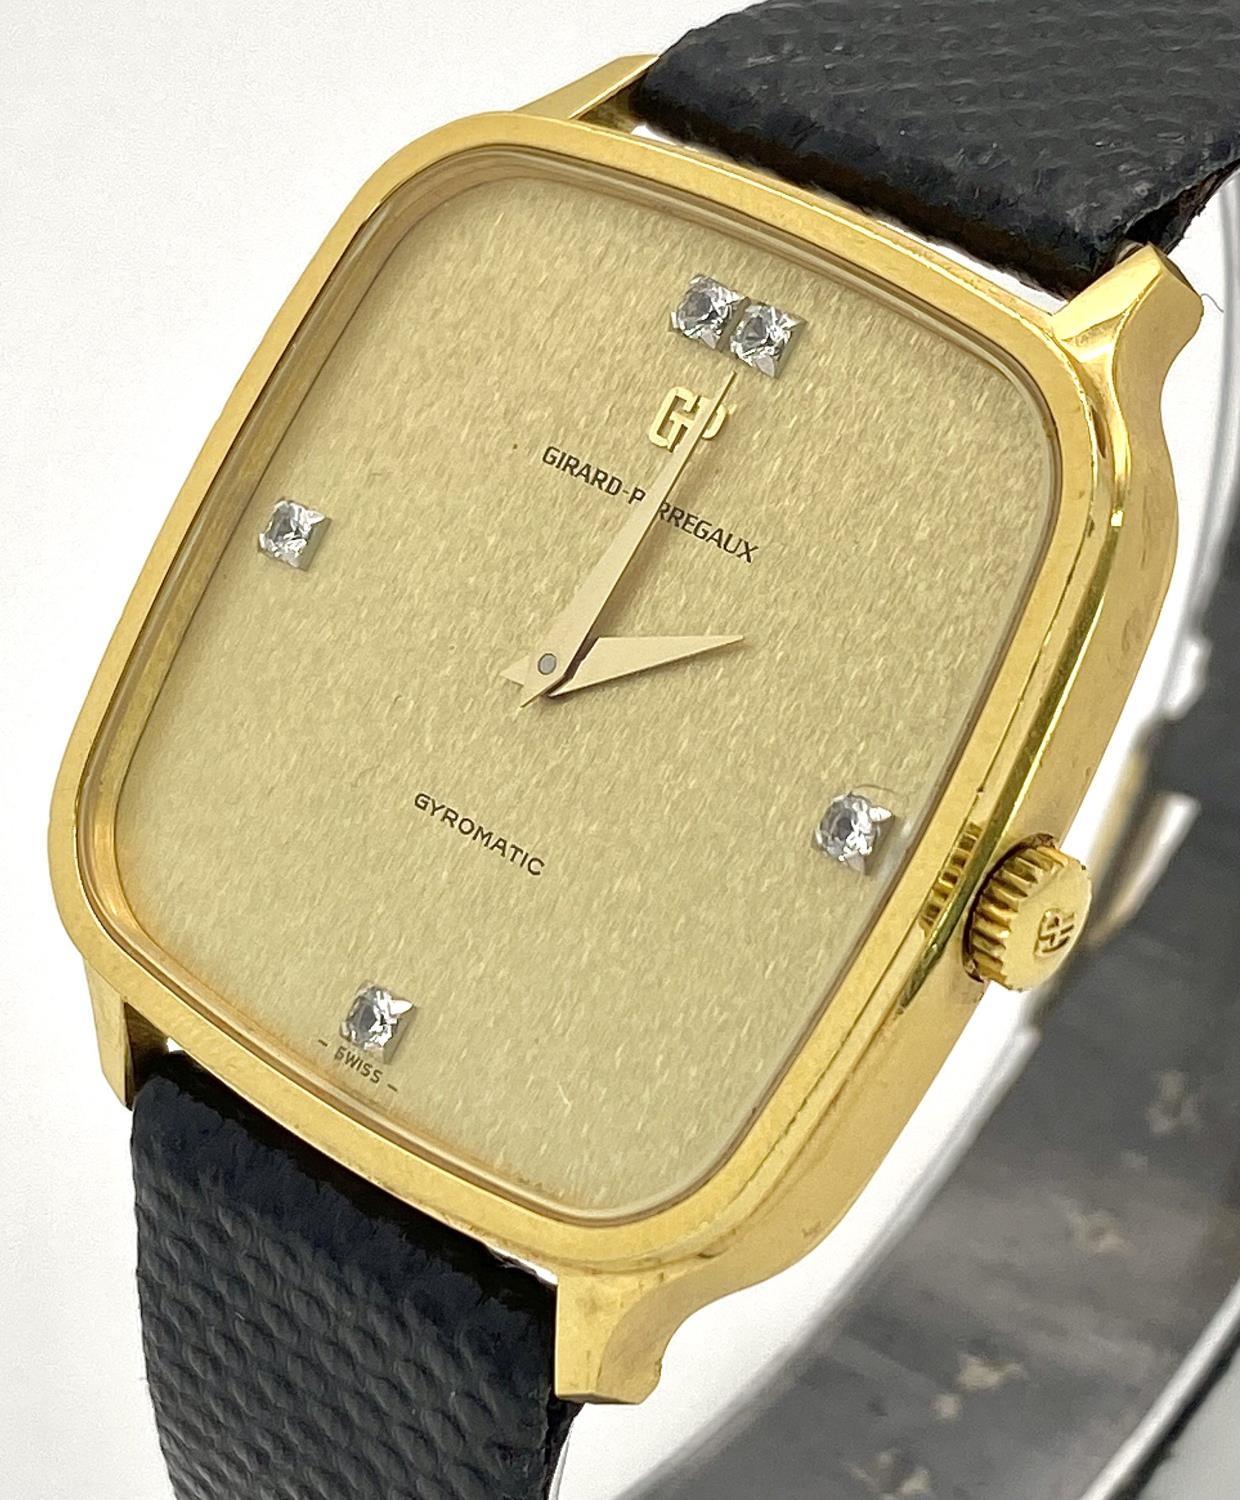 A Girard Perregaux Gold Plated Gyromatic Gents Watch. Black leather strap. Gold plated case - - Bild 4 aus 6